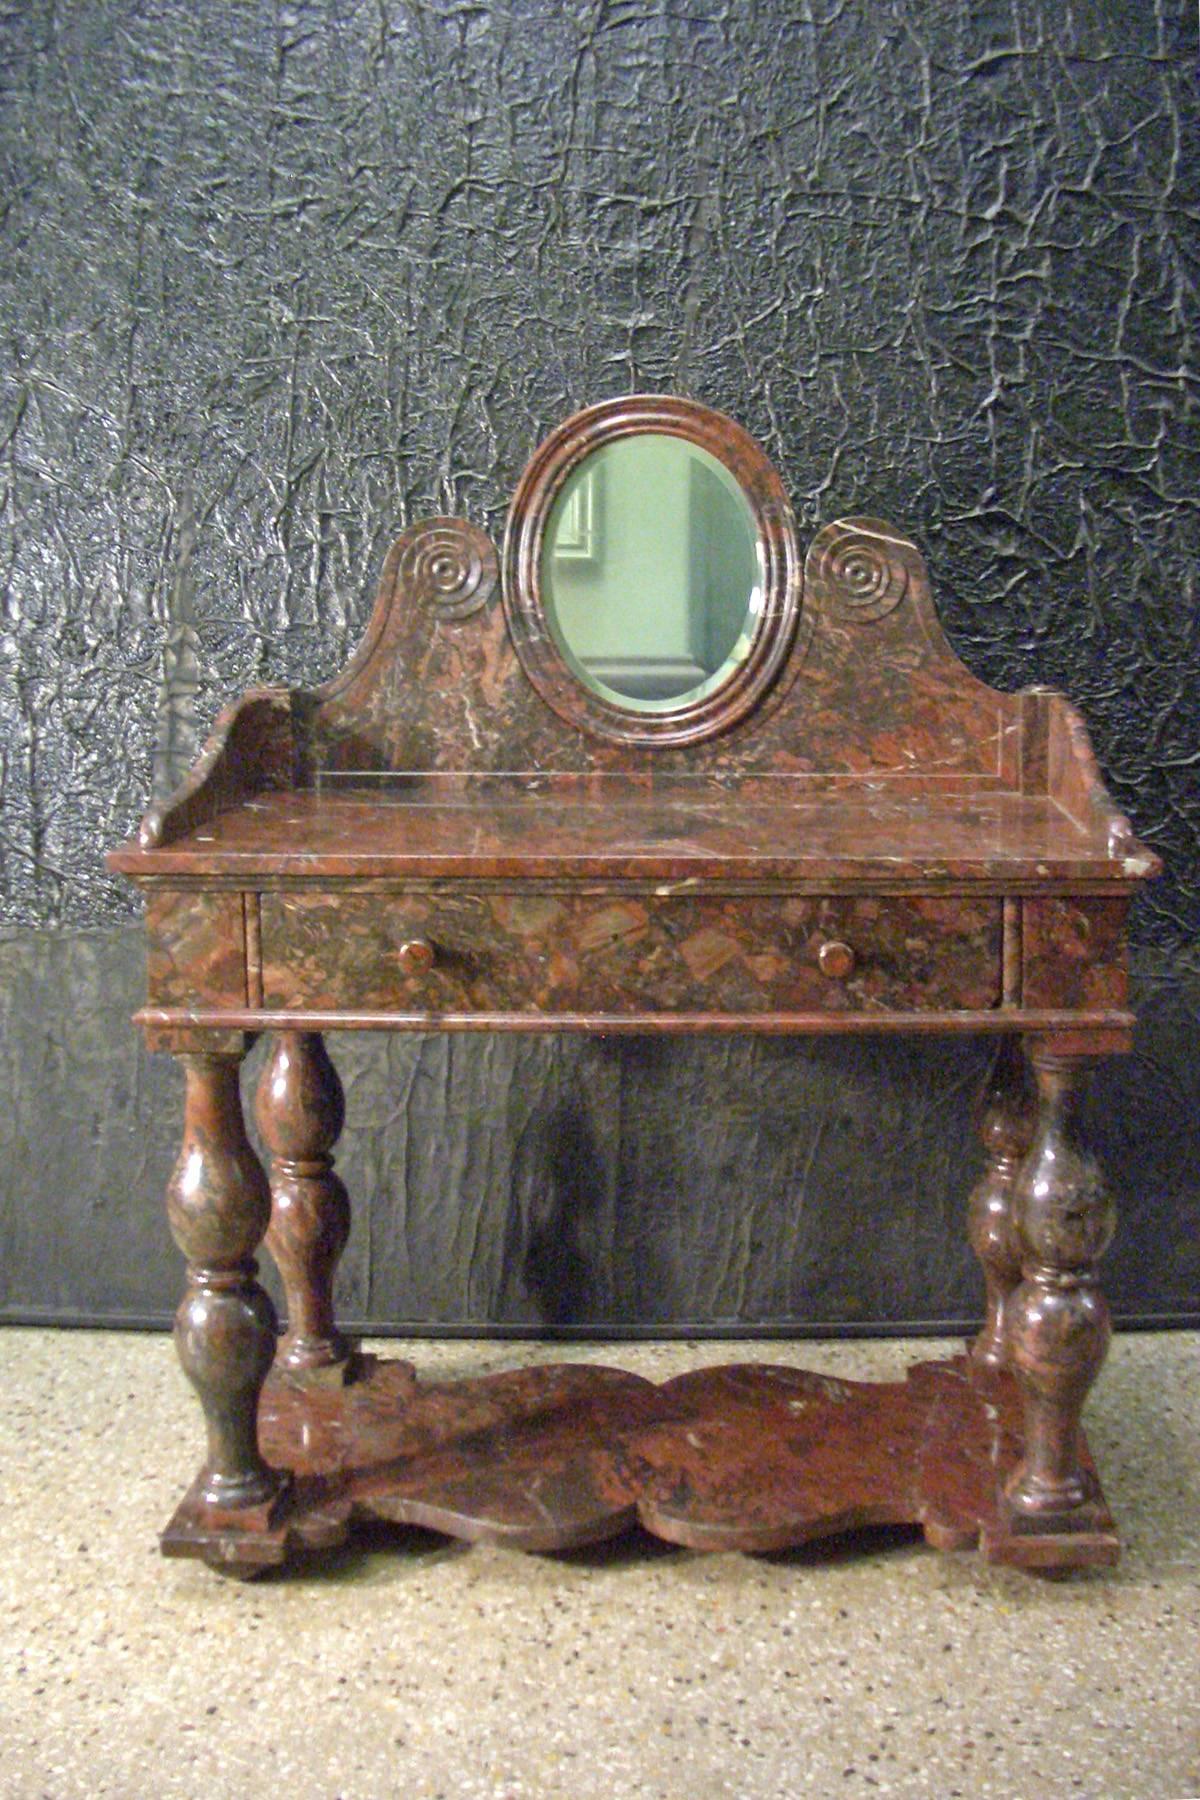 Very rare console table made of solid Griotte Rouge marble, that can transform from a conventional dressing table/vanity into a special serving console or into a bar, or....
In three parts, the turned double baluster legs connected by a base-slab on